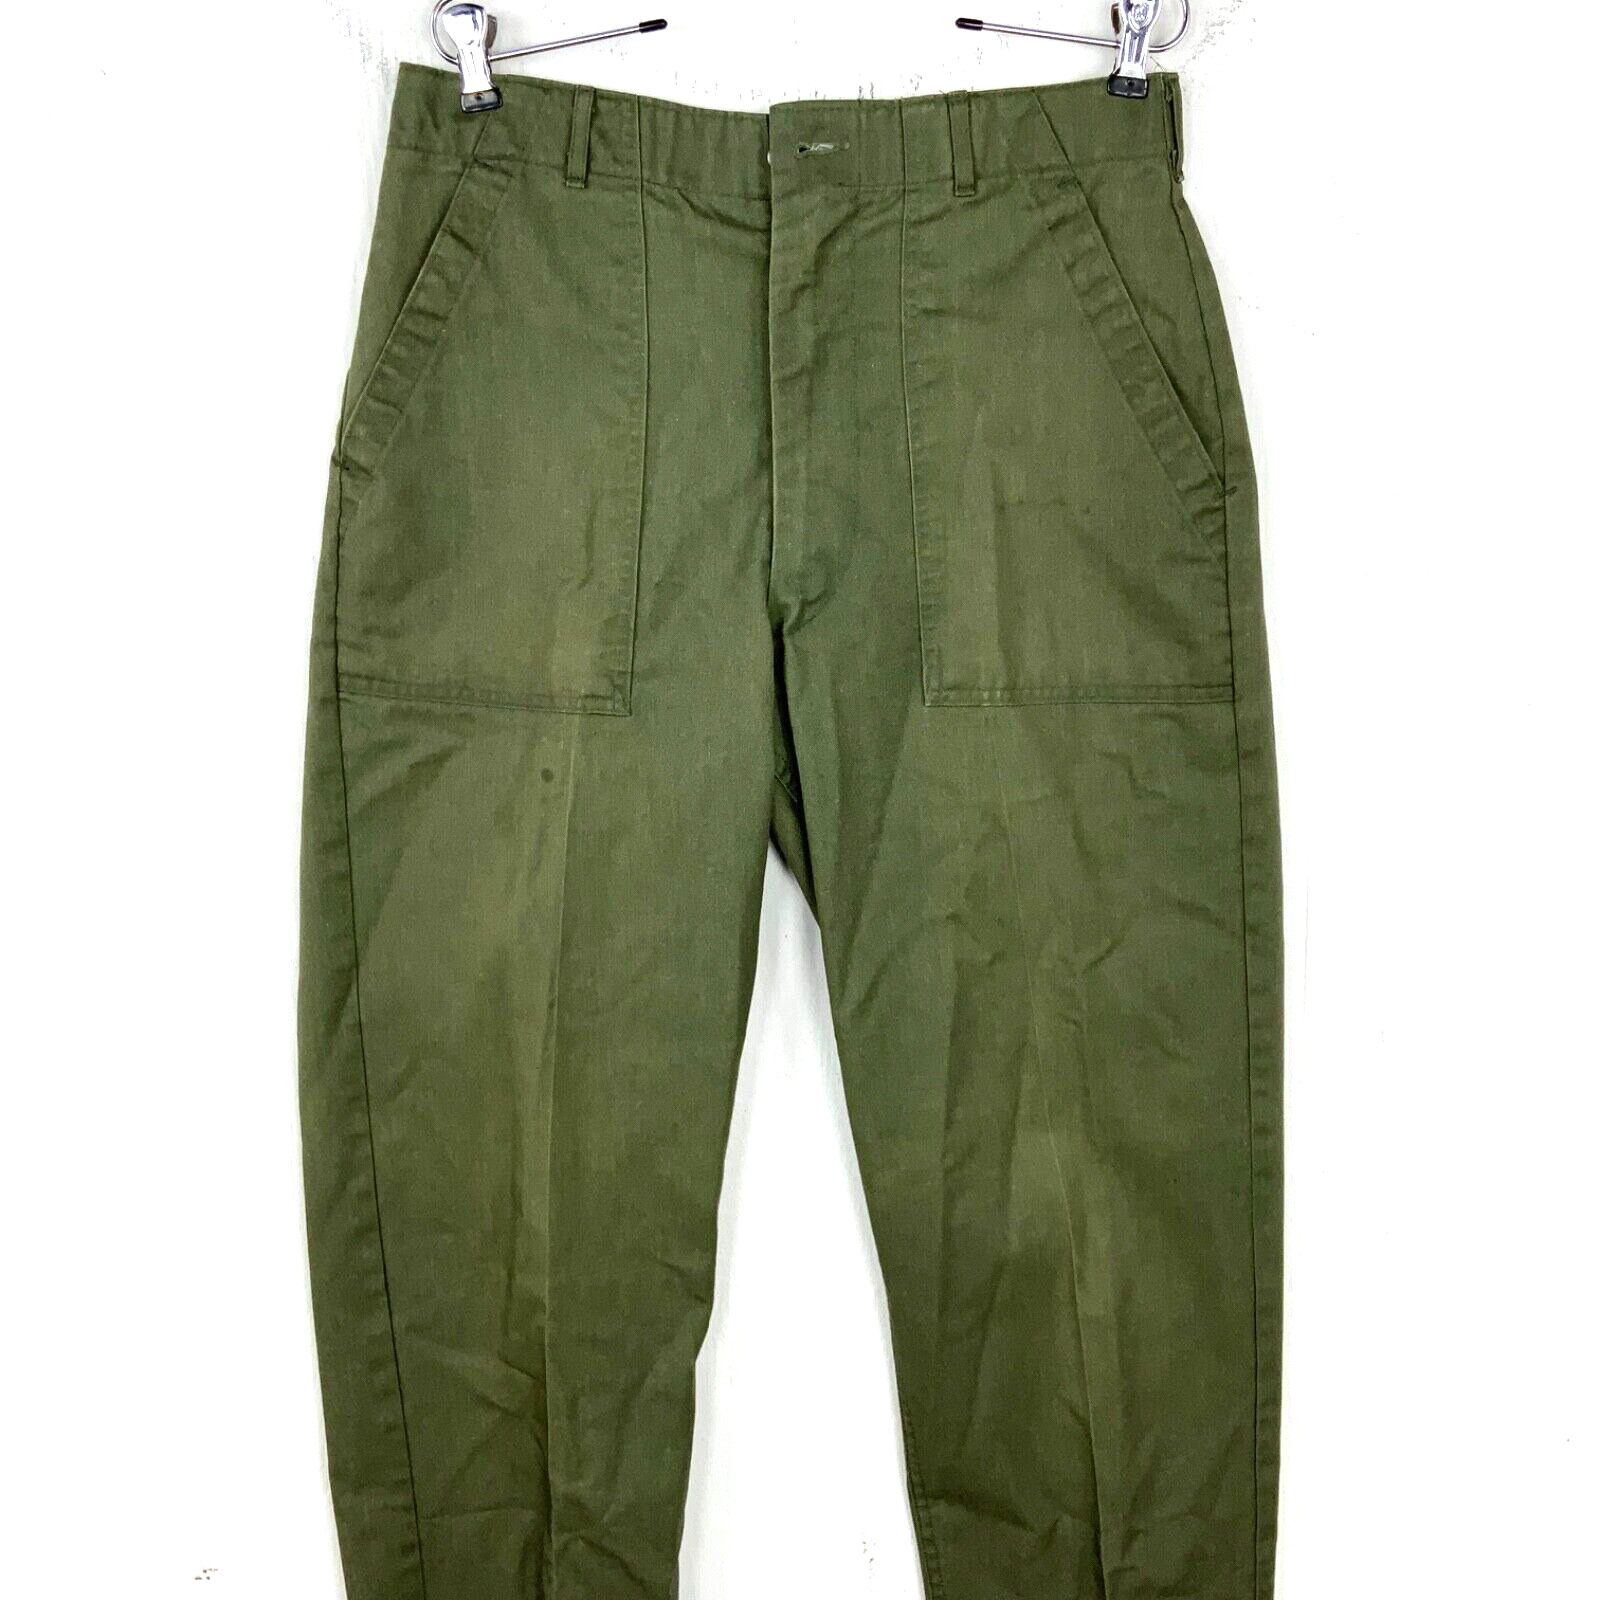 Vintage Us Military Og-507 Trousers 1984 Size 32x29 Green 80s